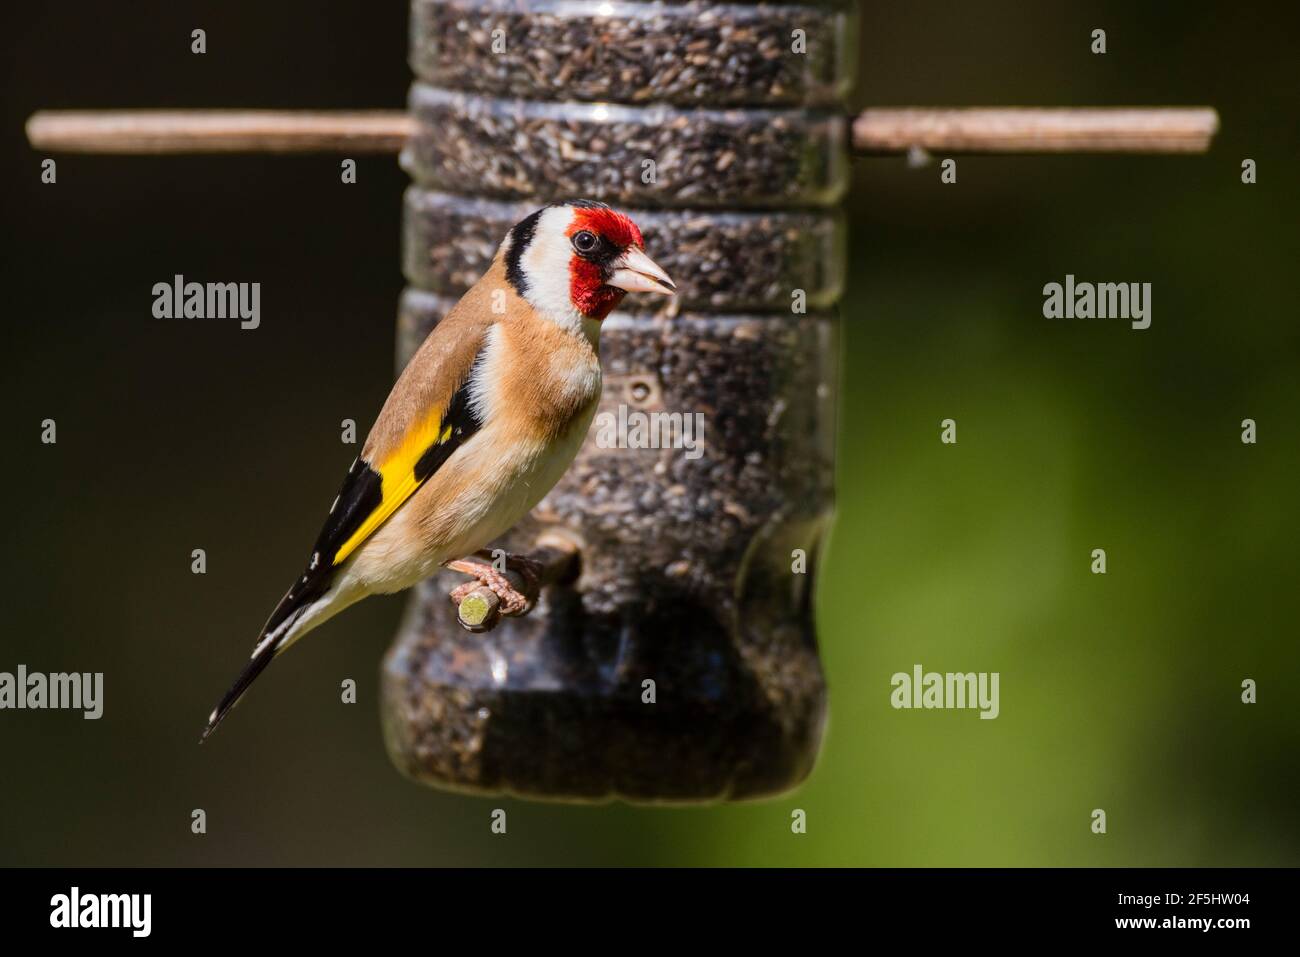 A Goldfinch (Carduelis carduelis) feeding on niger seed in the Uk Stock Photo